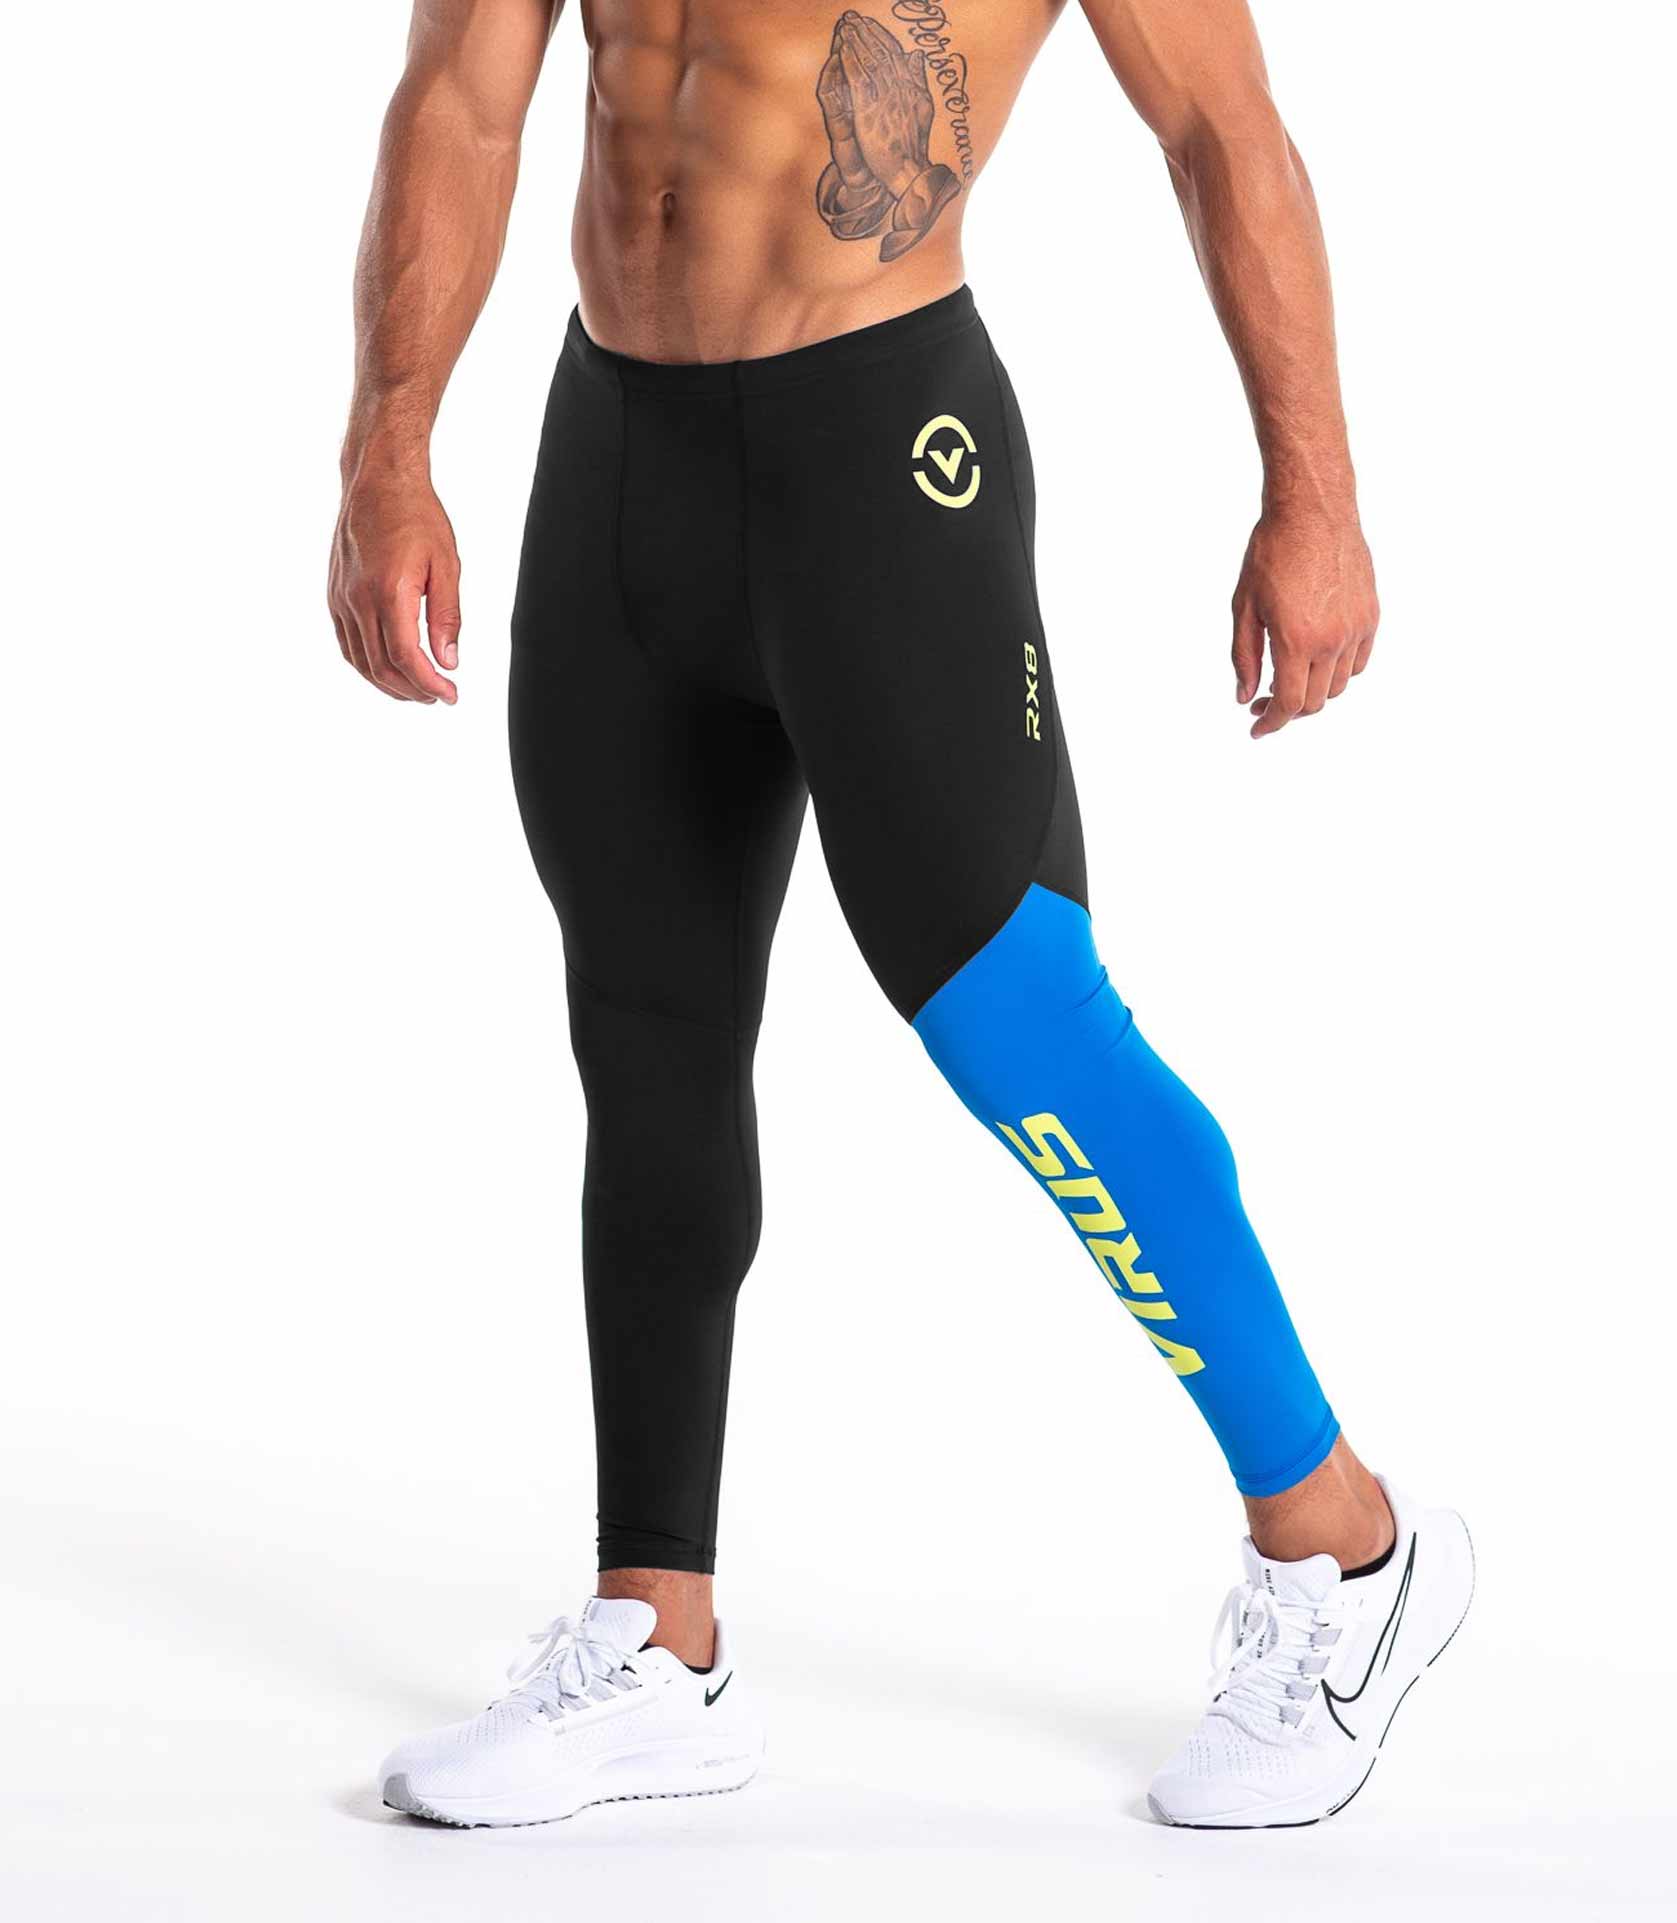 DEVOROPA Youth Boys' Compression Pants with Knee India | Ubuy